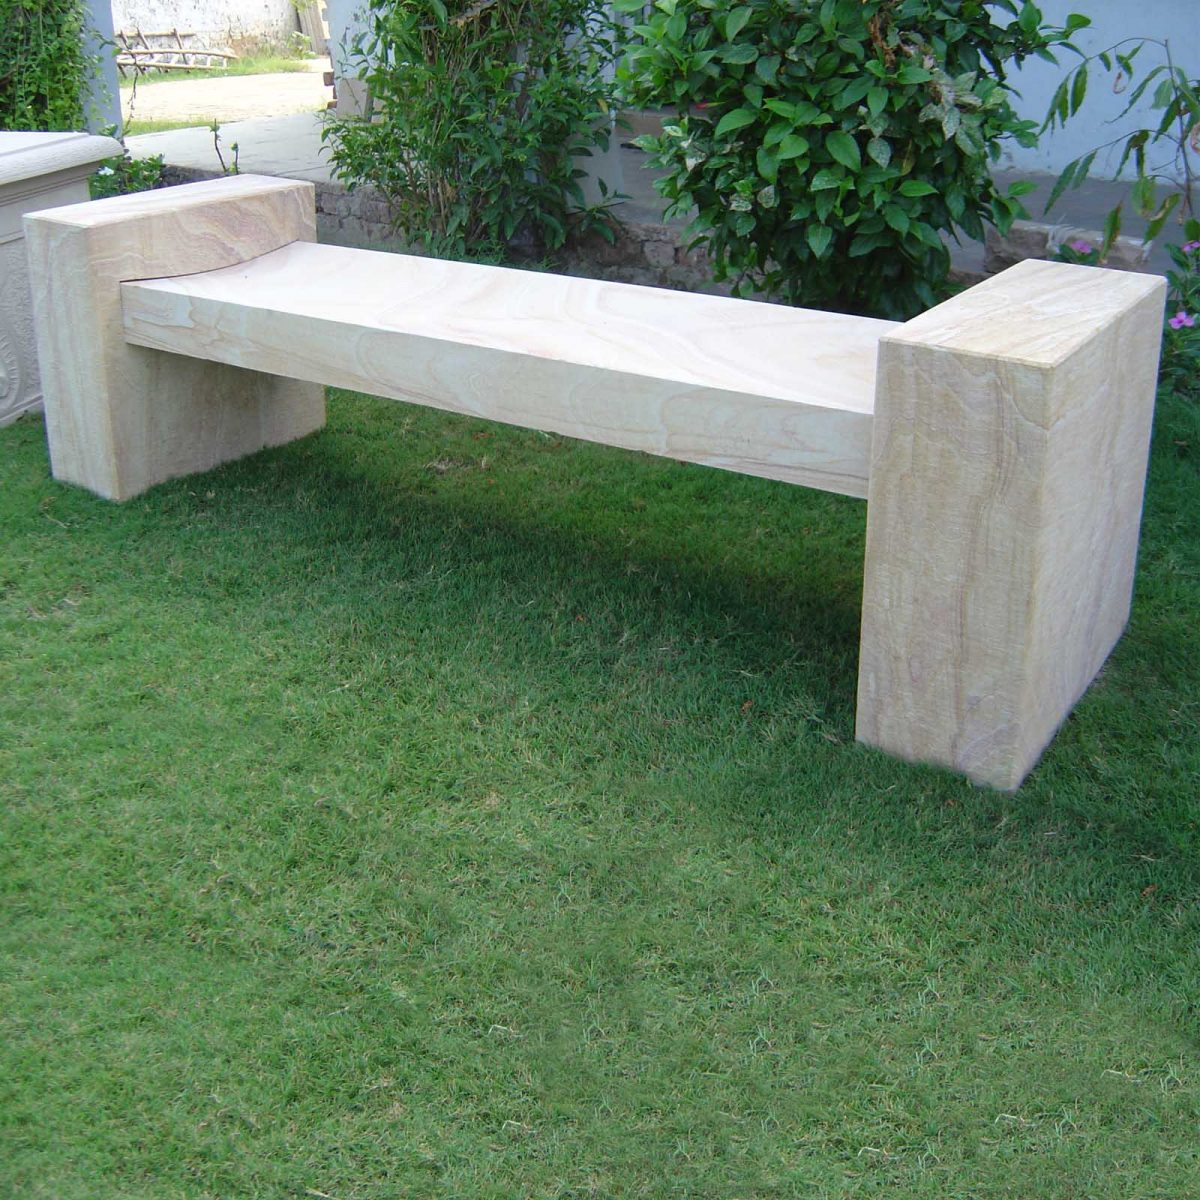 Stone Garden Bench Outdoor Articles For Sale From Indian